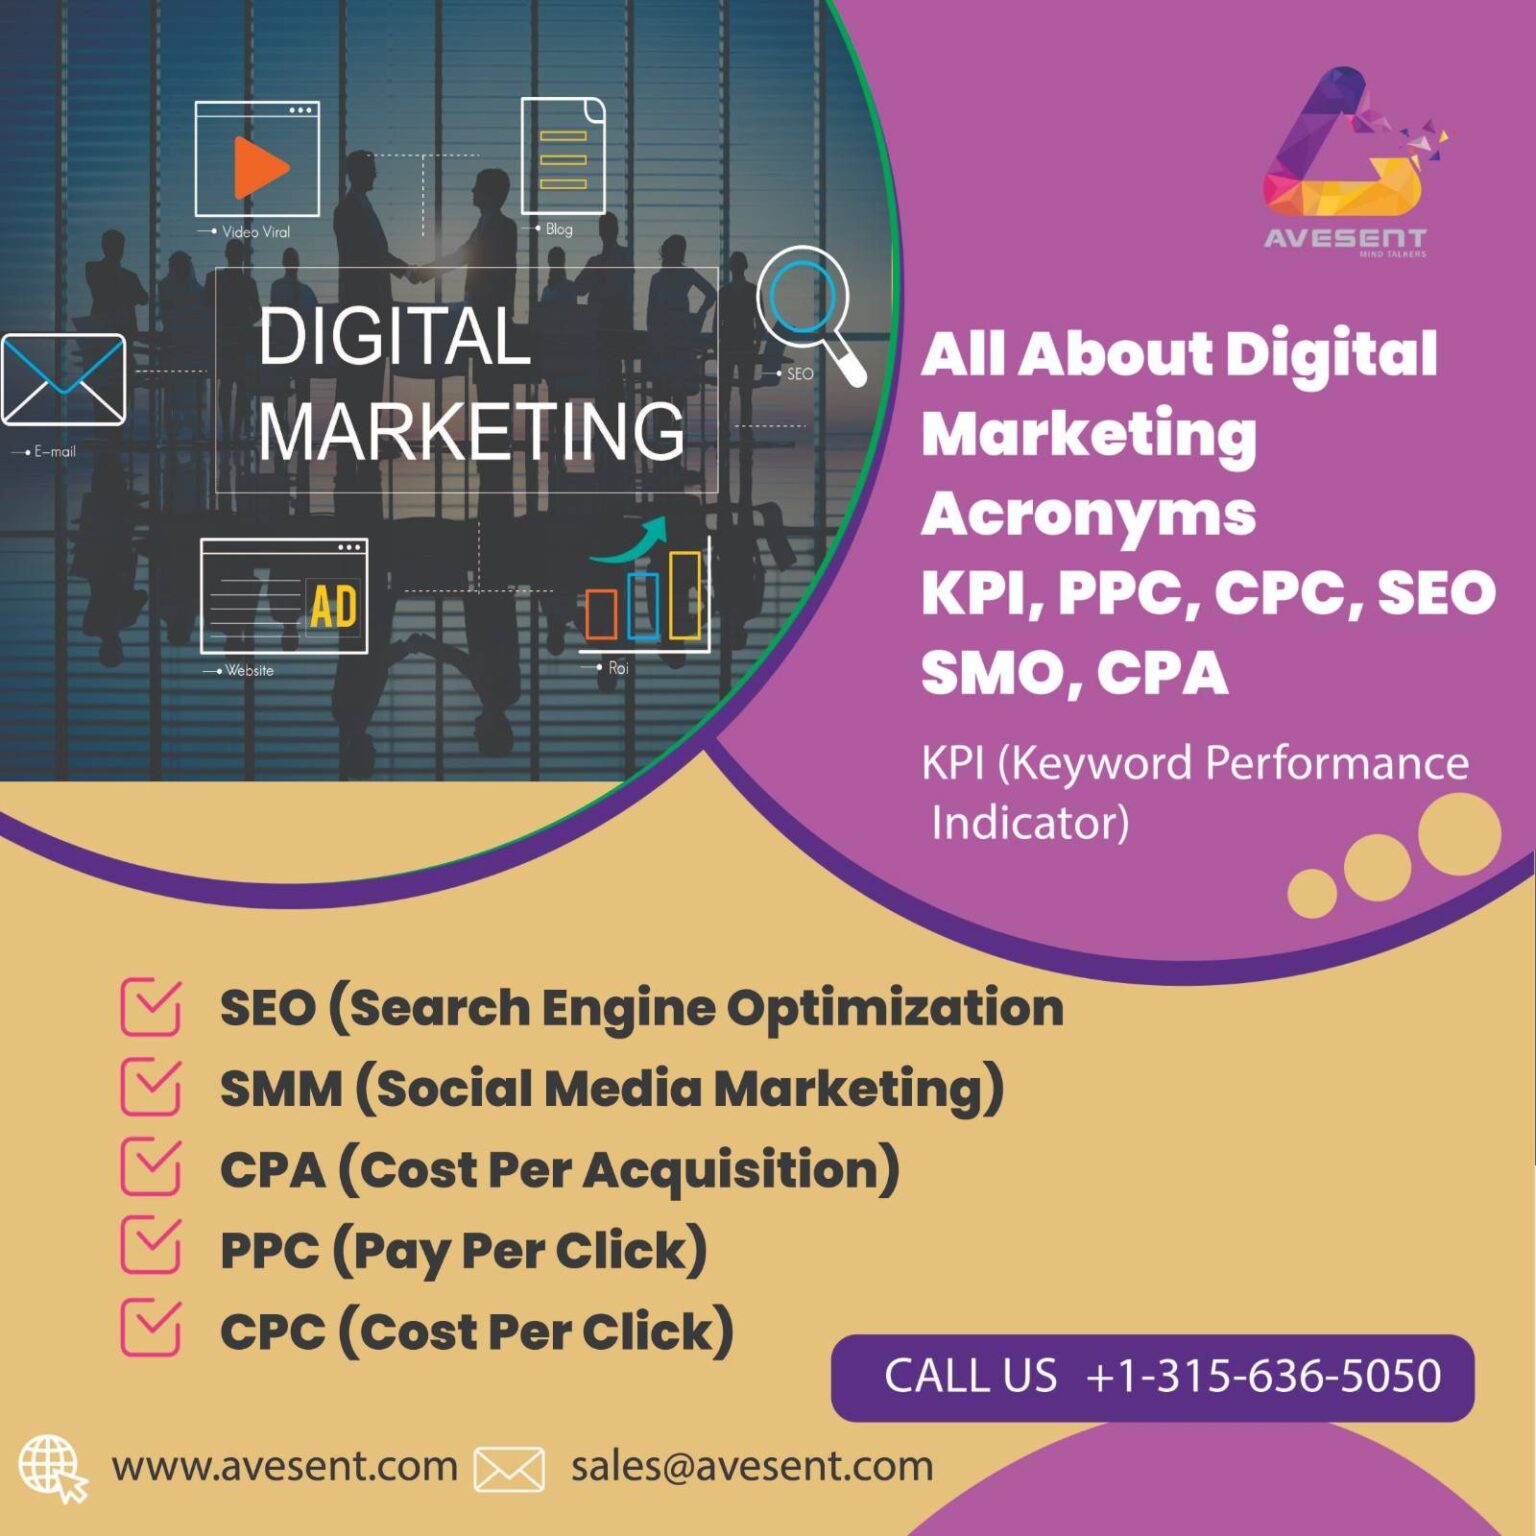 You are currently viewing All About Digital Marketing Acronyms KPI, PPC, CPC, SEO, SMO, CPA